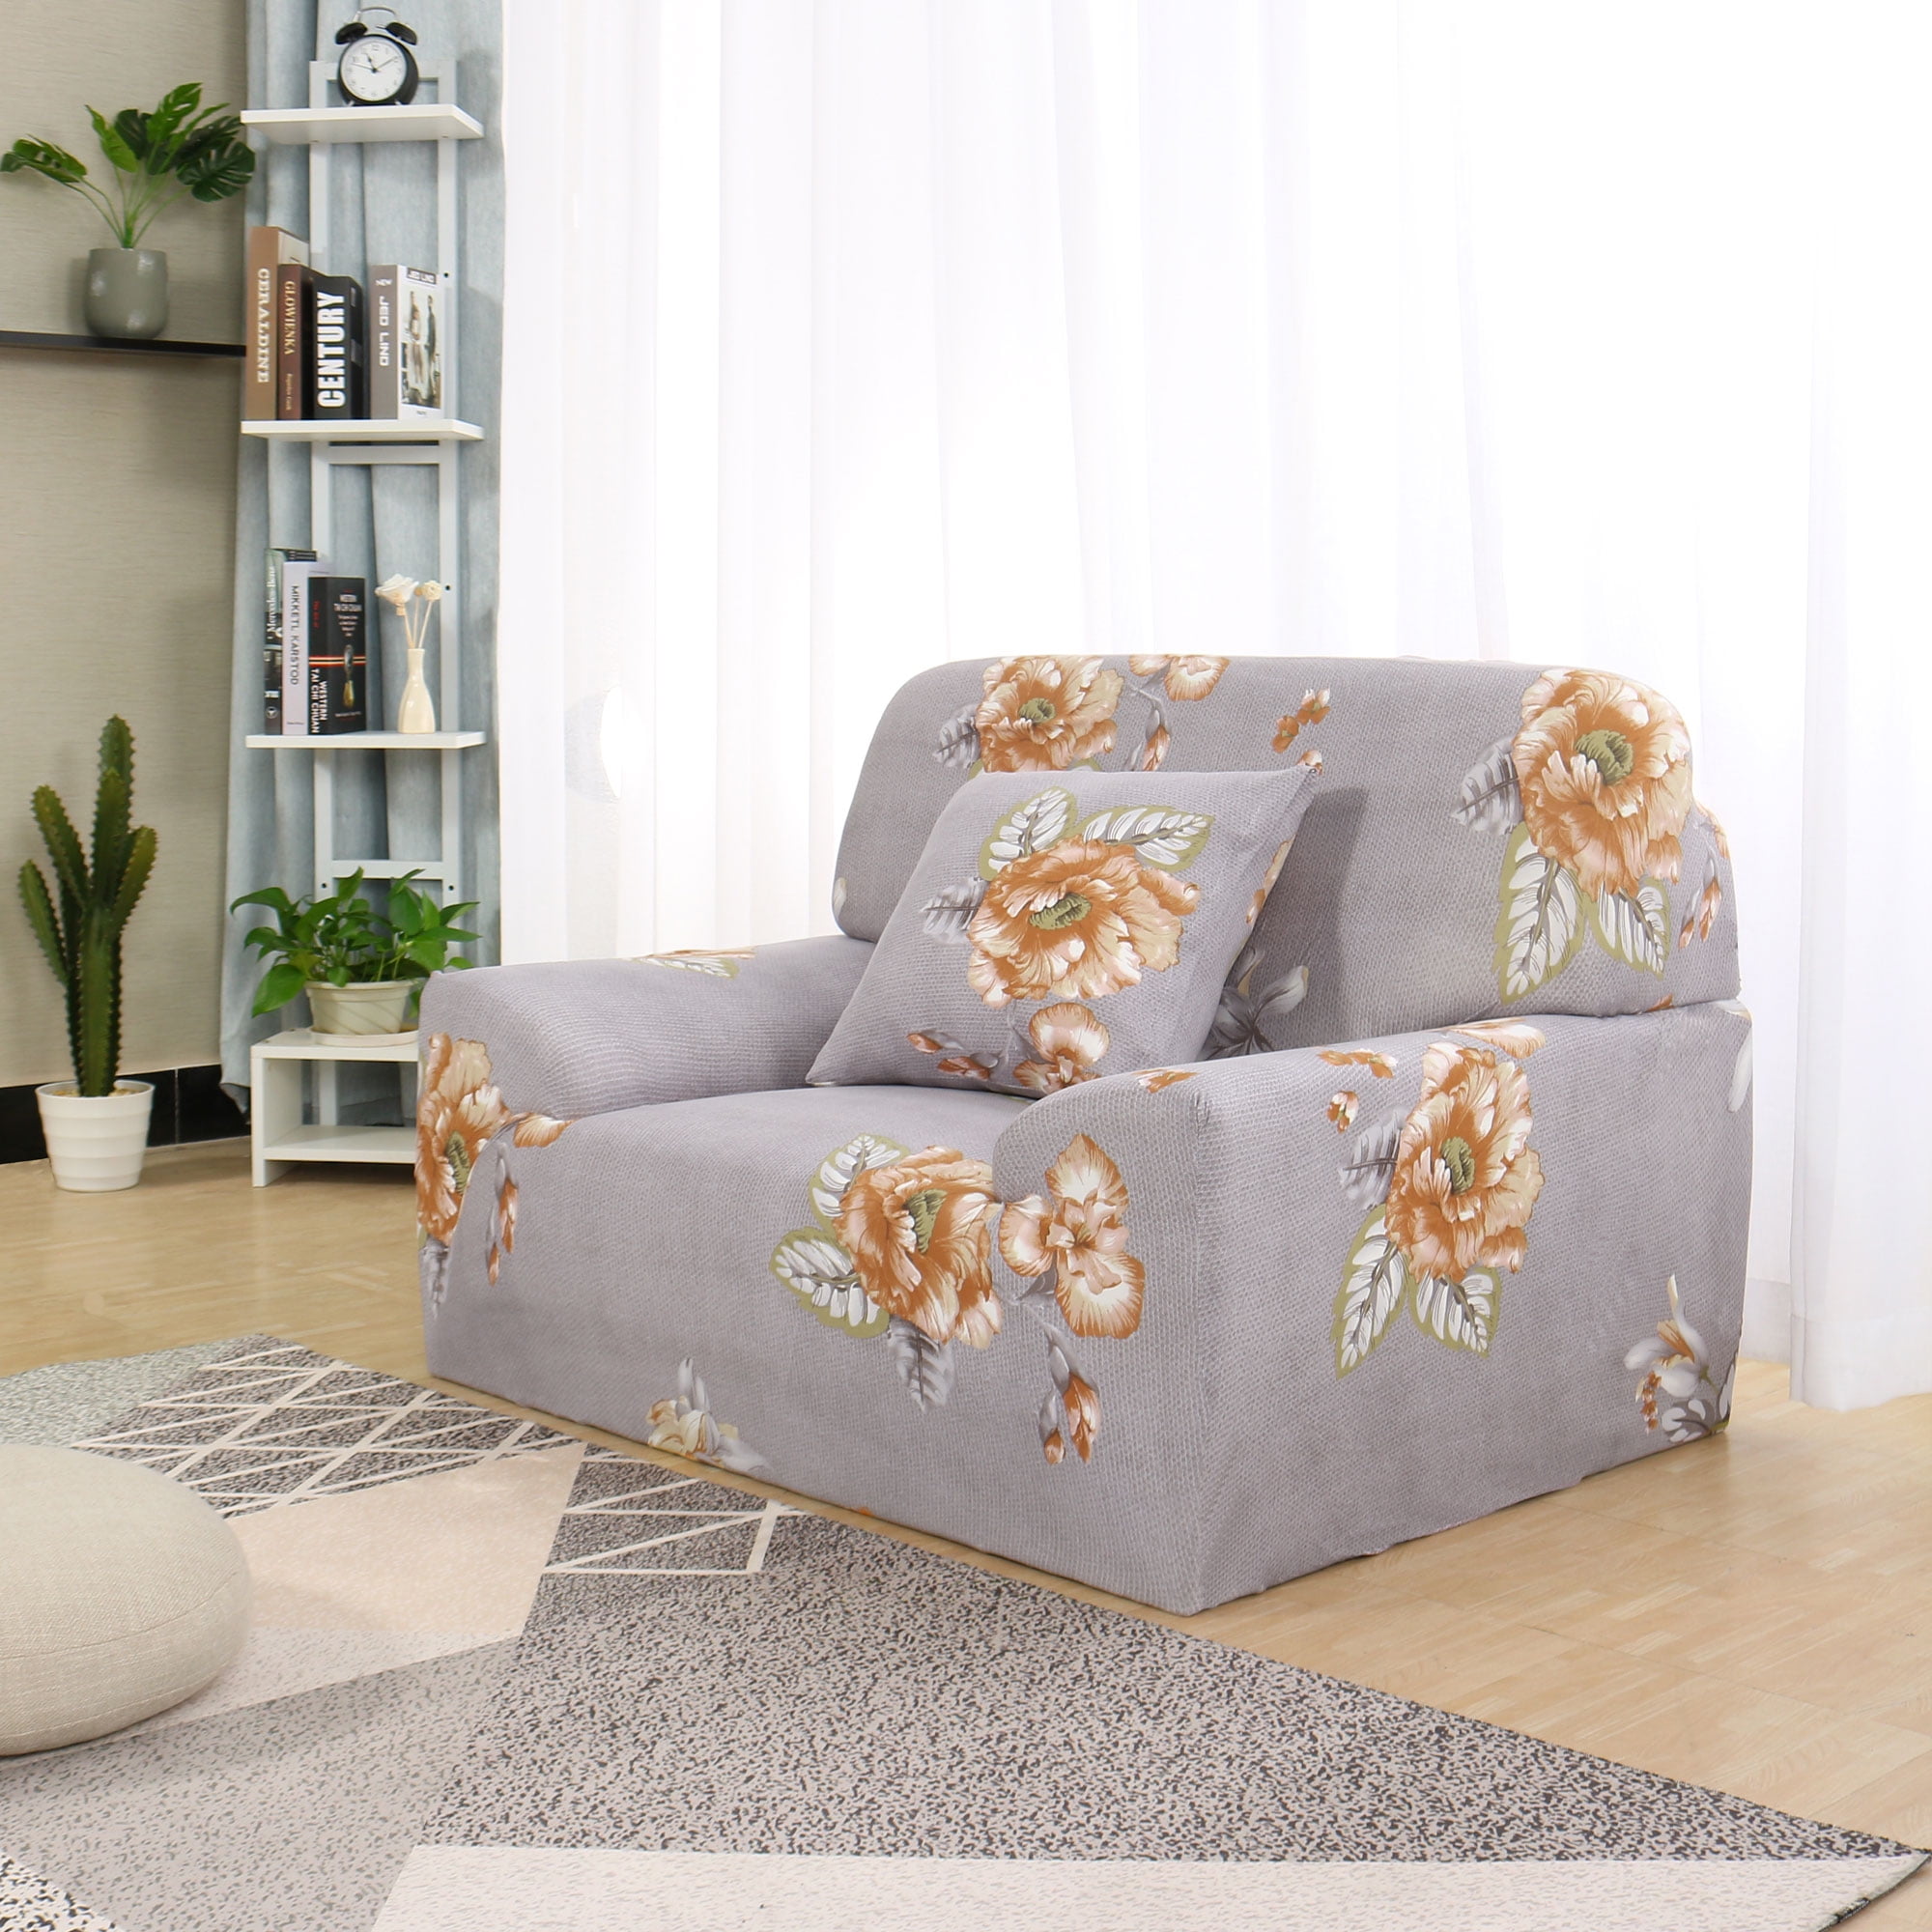 Details about   Modern Sofa Cover Linen Woven Non-slip Case Sofa Towel Couch Seater Sofa Cover 